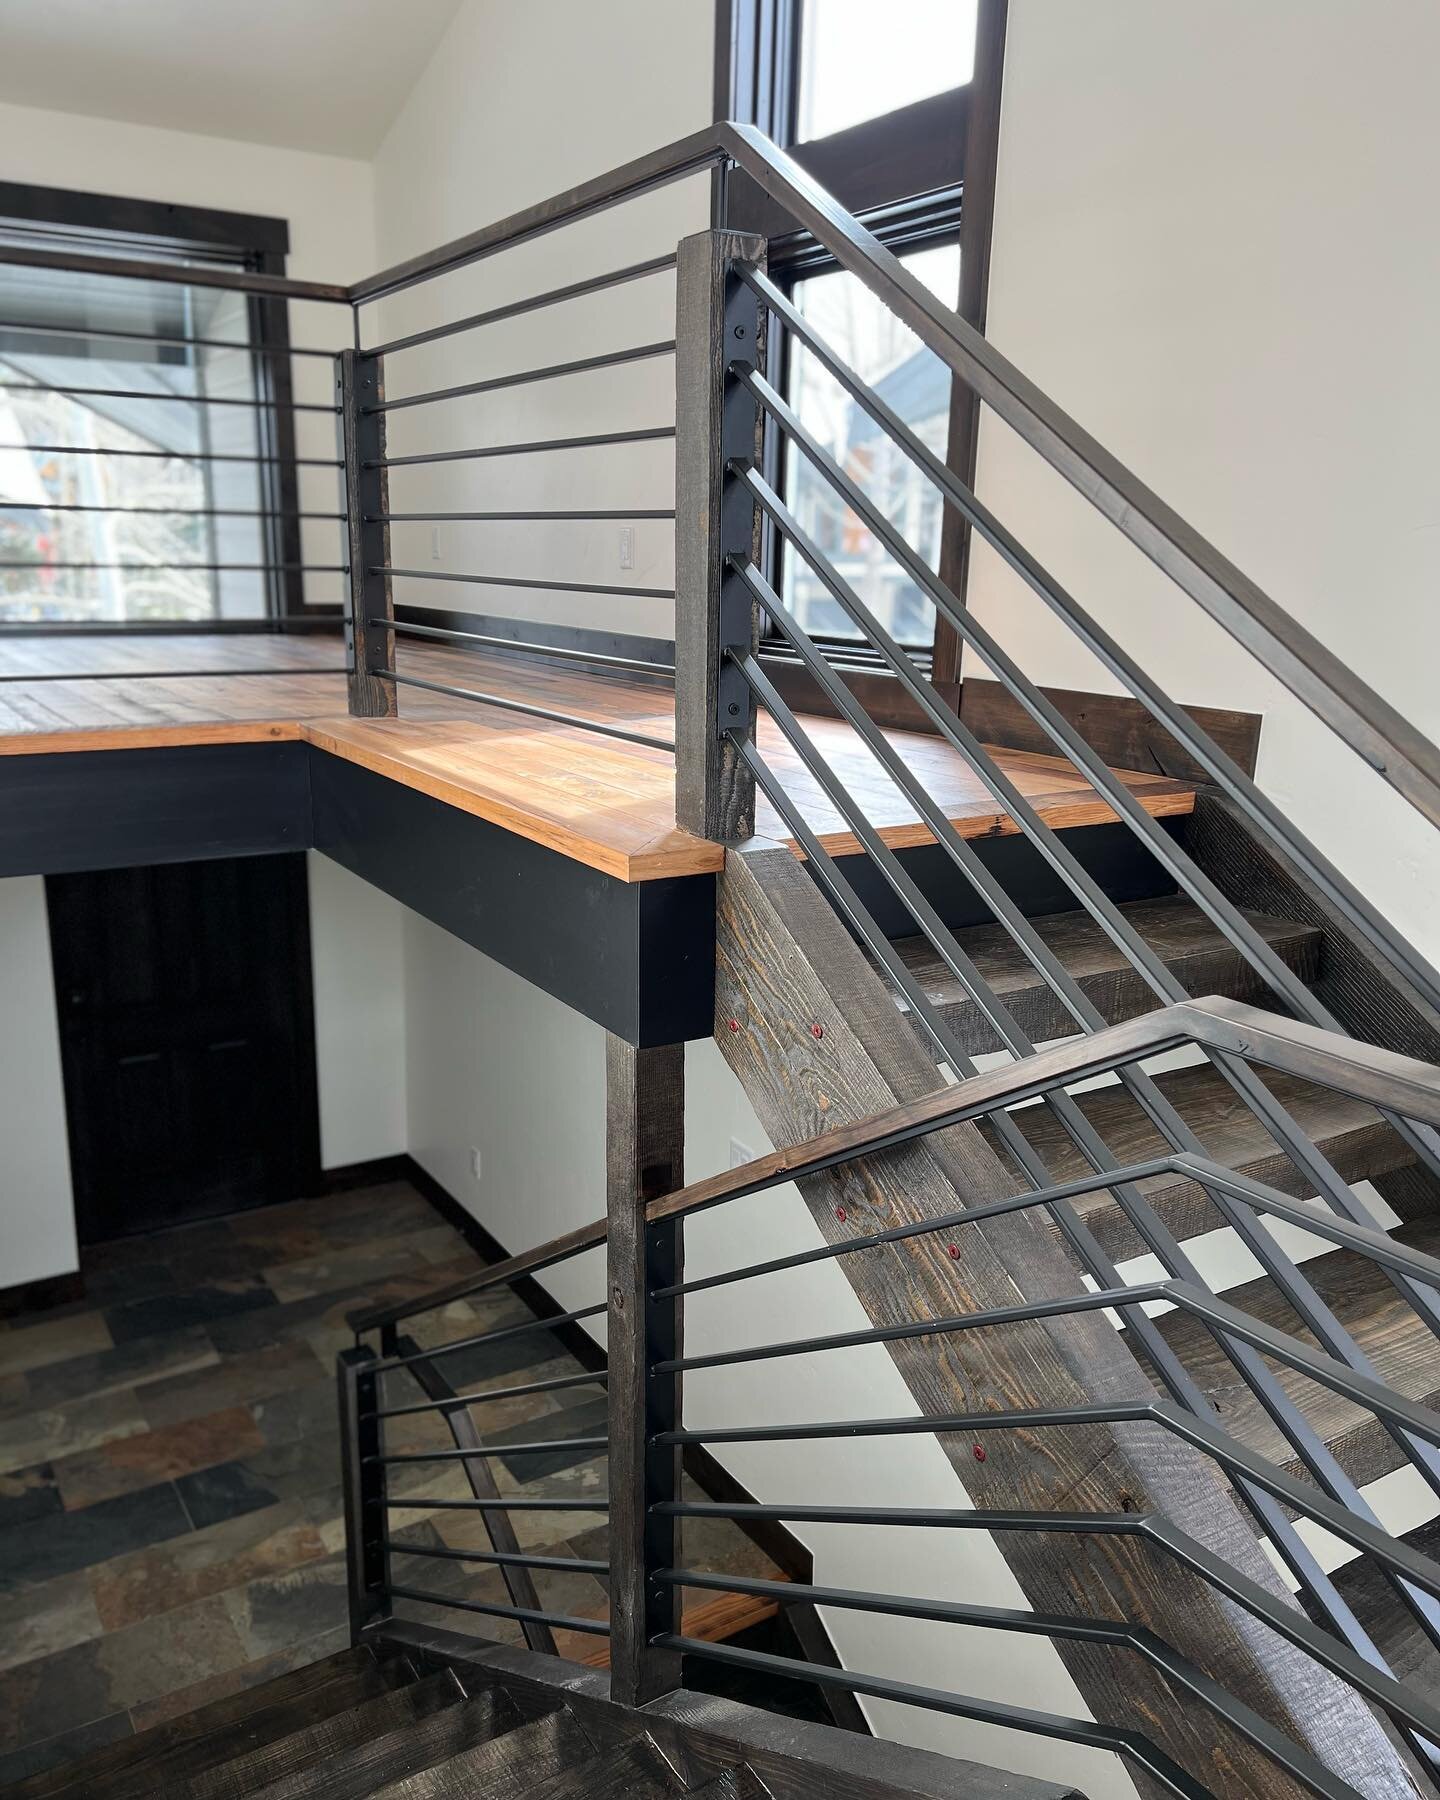 New steel railings and loft office space!  Use all the space you can.  #ibddesignstudio